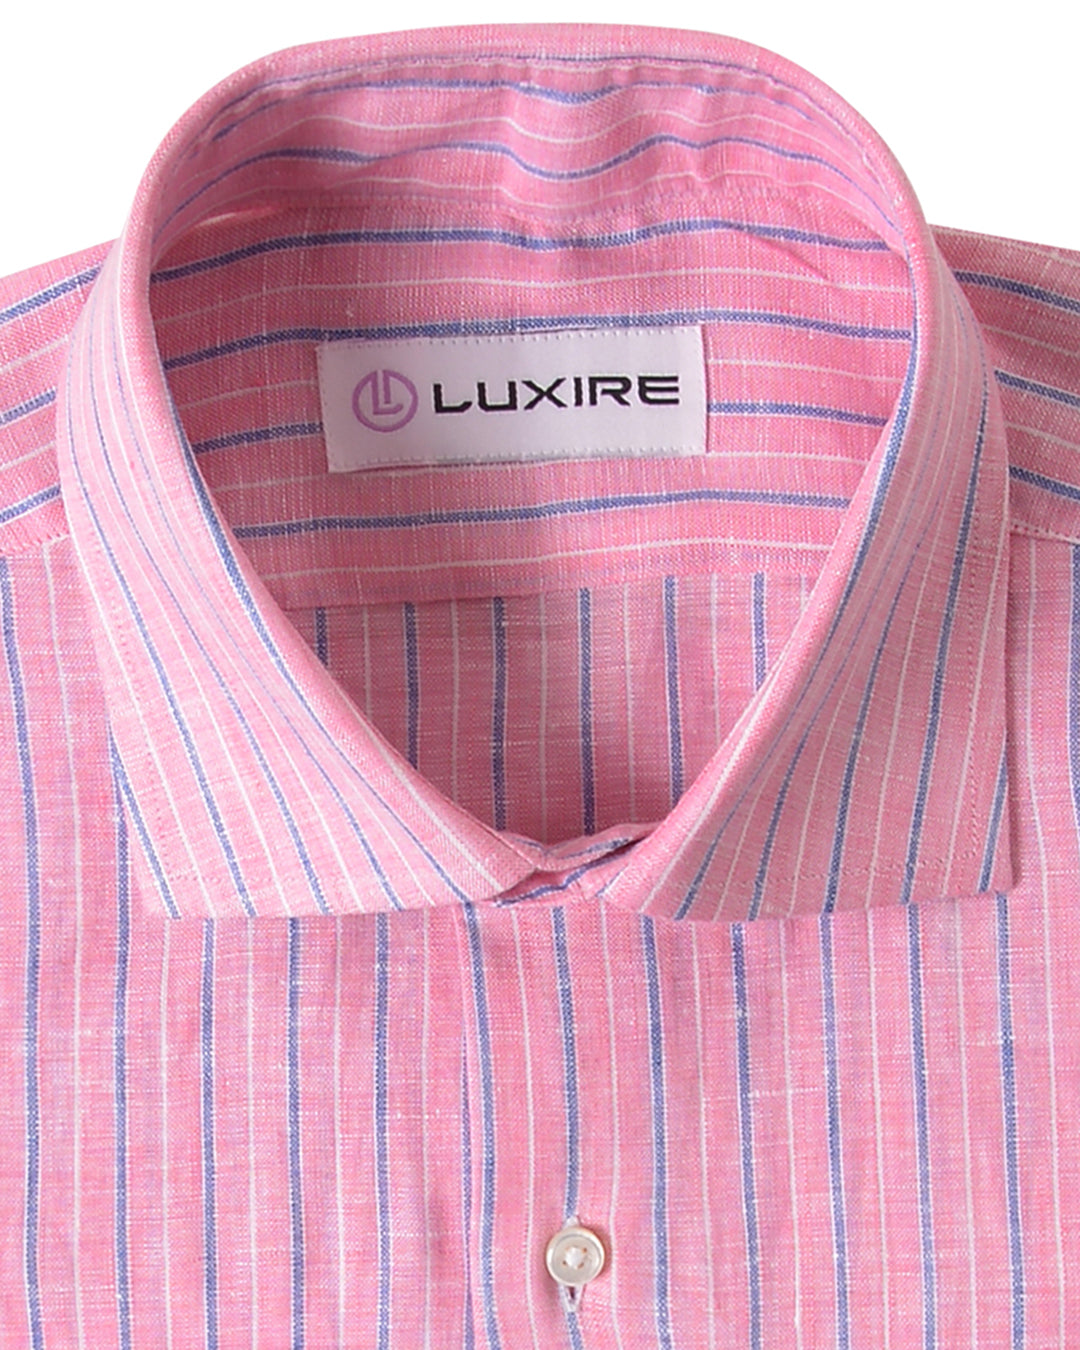 Collar up of the custom linen shirt for men in pink and blue stripes by Luxire Clothing